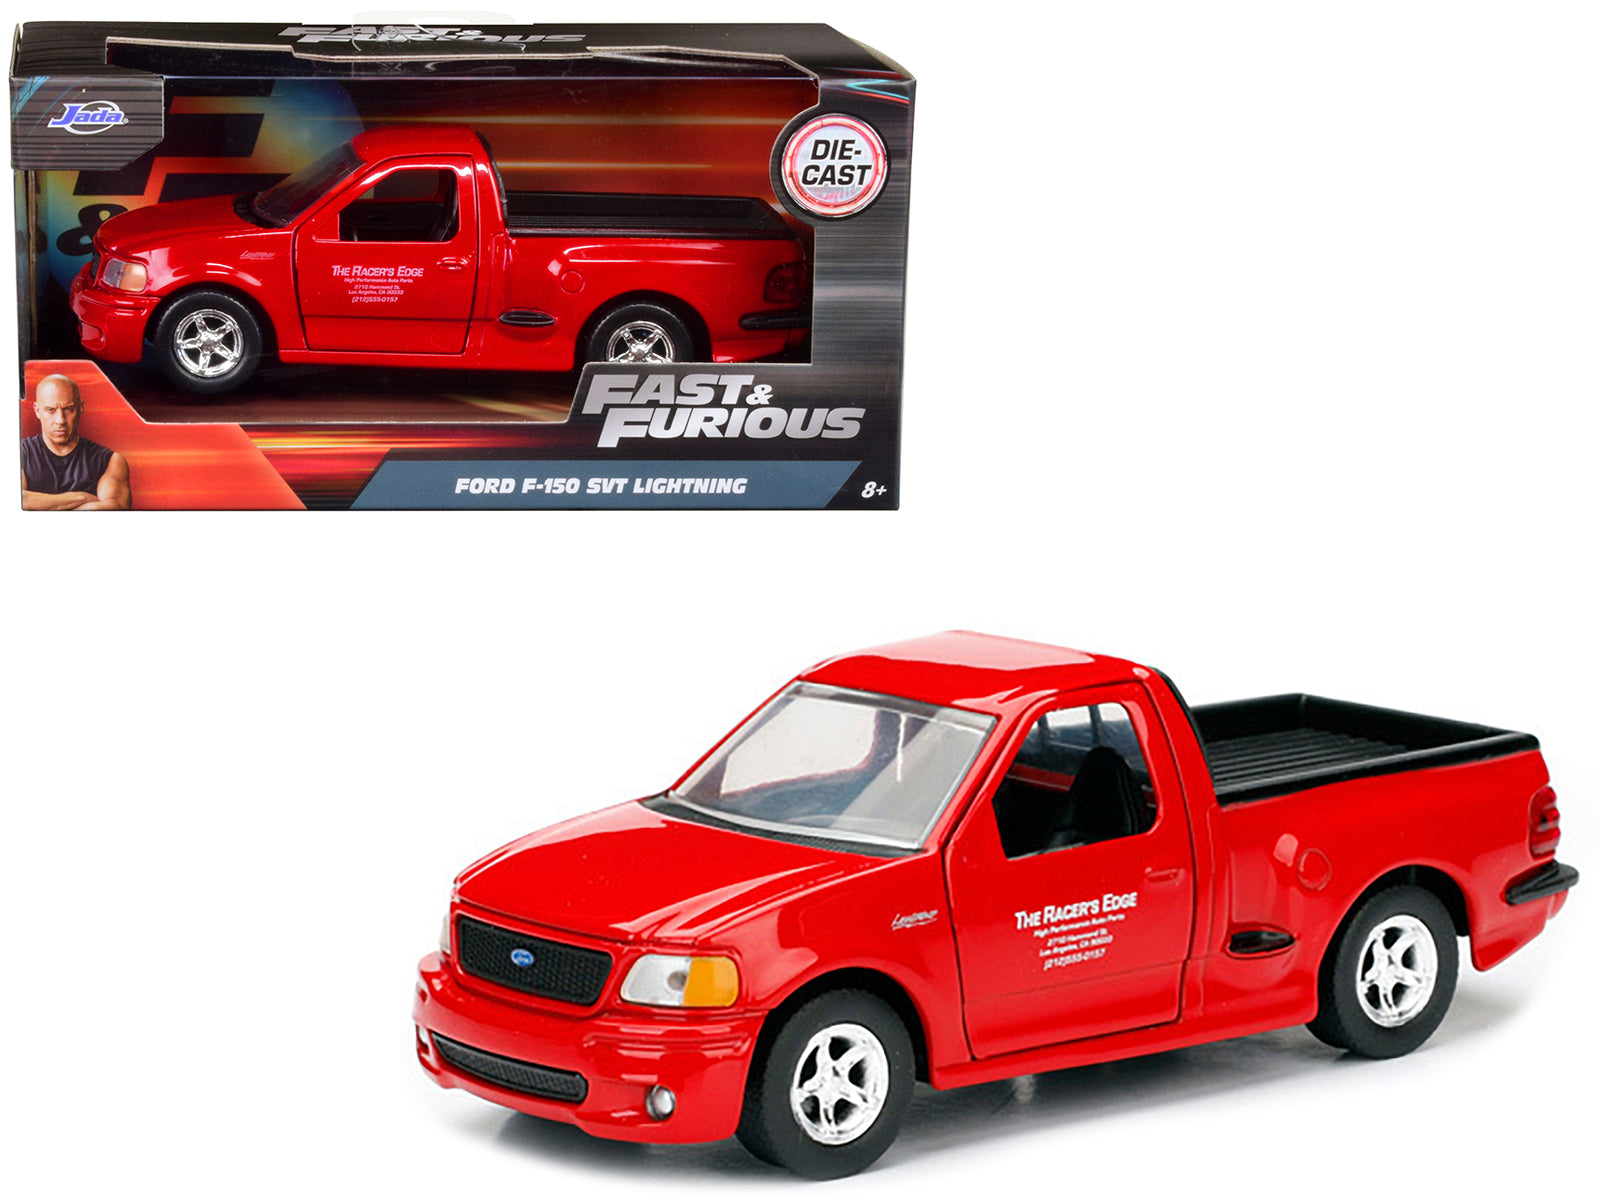 Brand new 1/32 scale diecast car model of Brian's 1999 Ford F-150 SVT Lightning Pickup Truck Red Fast Furious Movie die cast model car by Ja